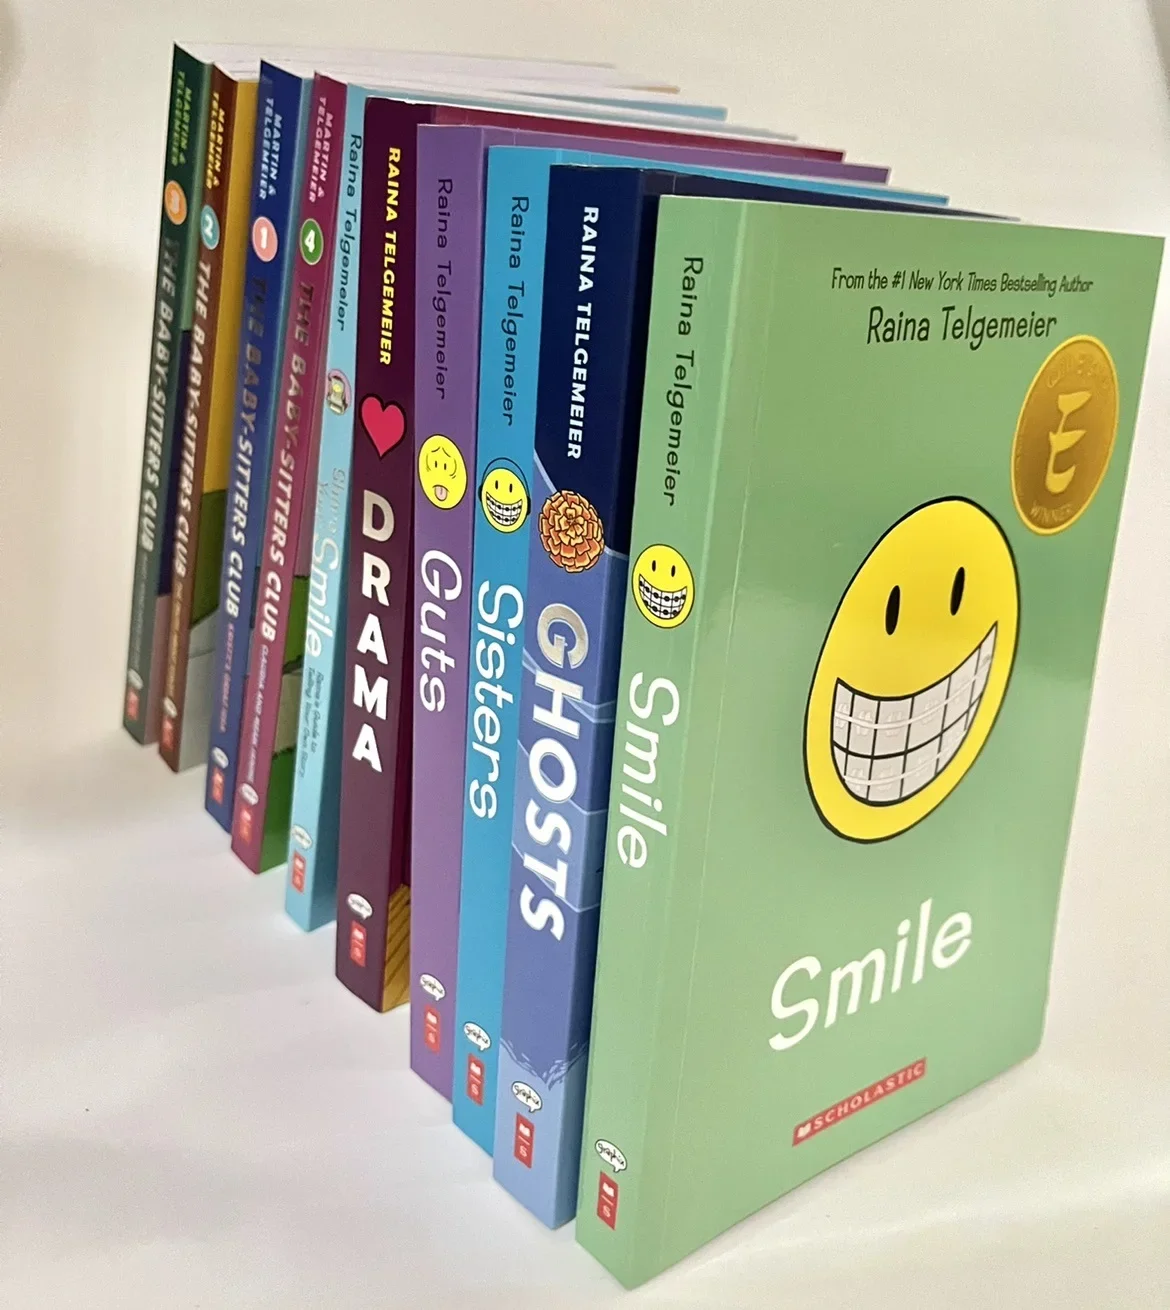 

10 Volumes Raina Telgemeier English Smiling Full Color Graphic Novel, Children's Mood Picture Book Teenager Growth Stories